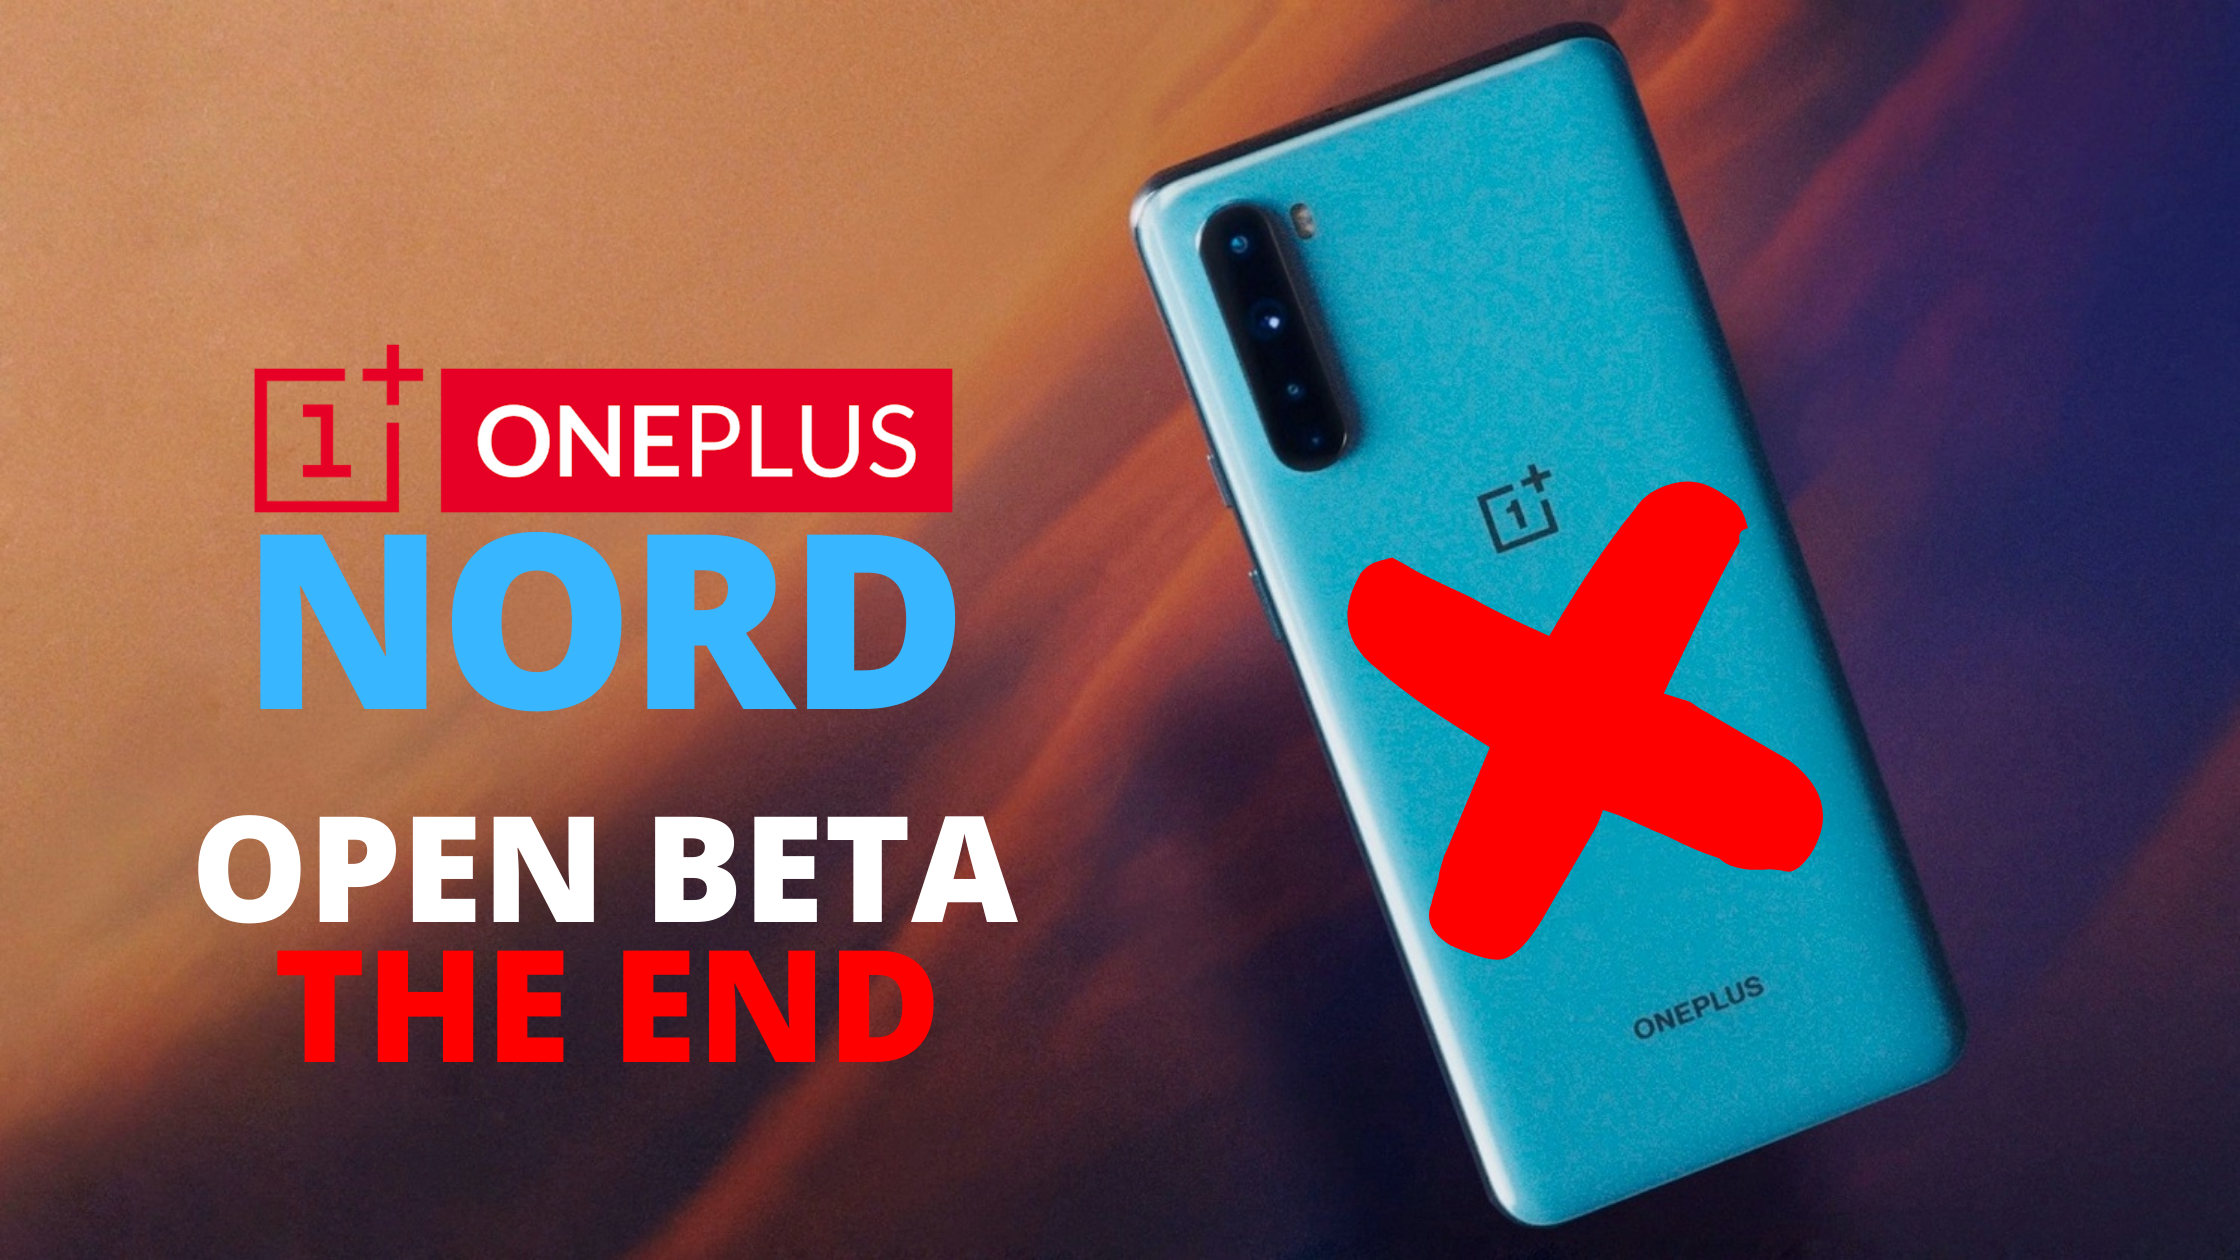 OnePlus Nord Open Beta Testing has Ended